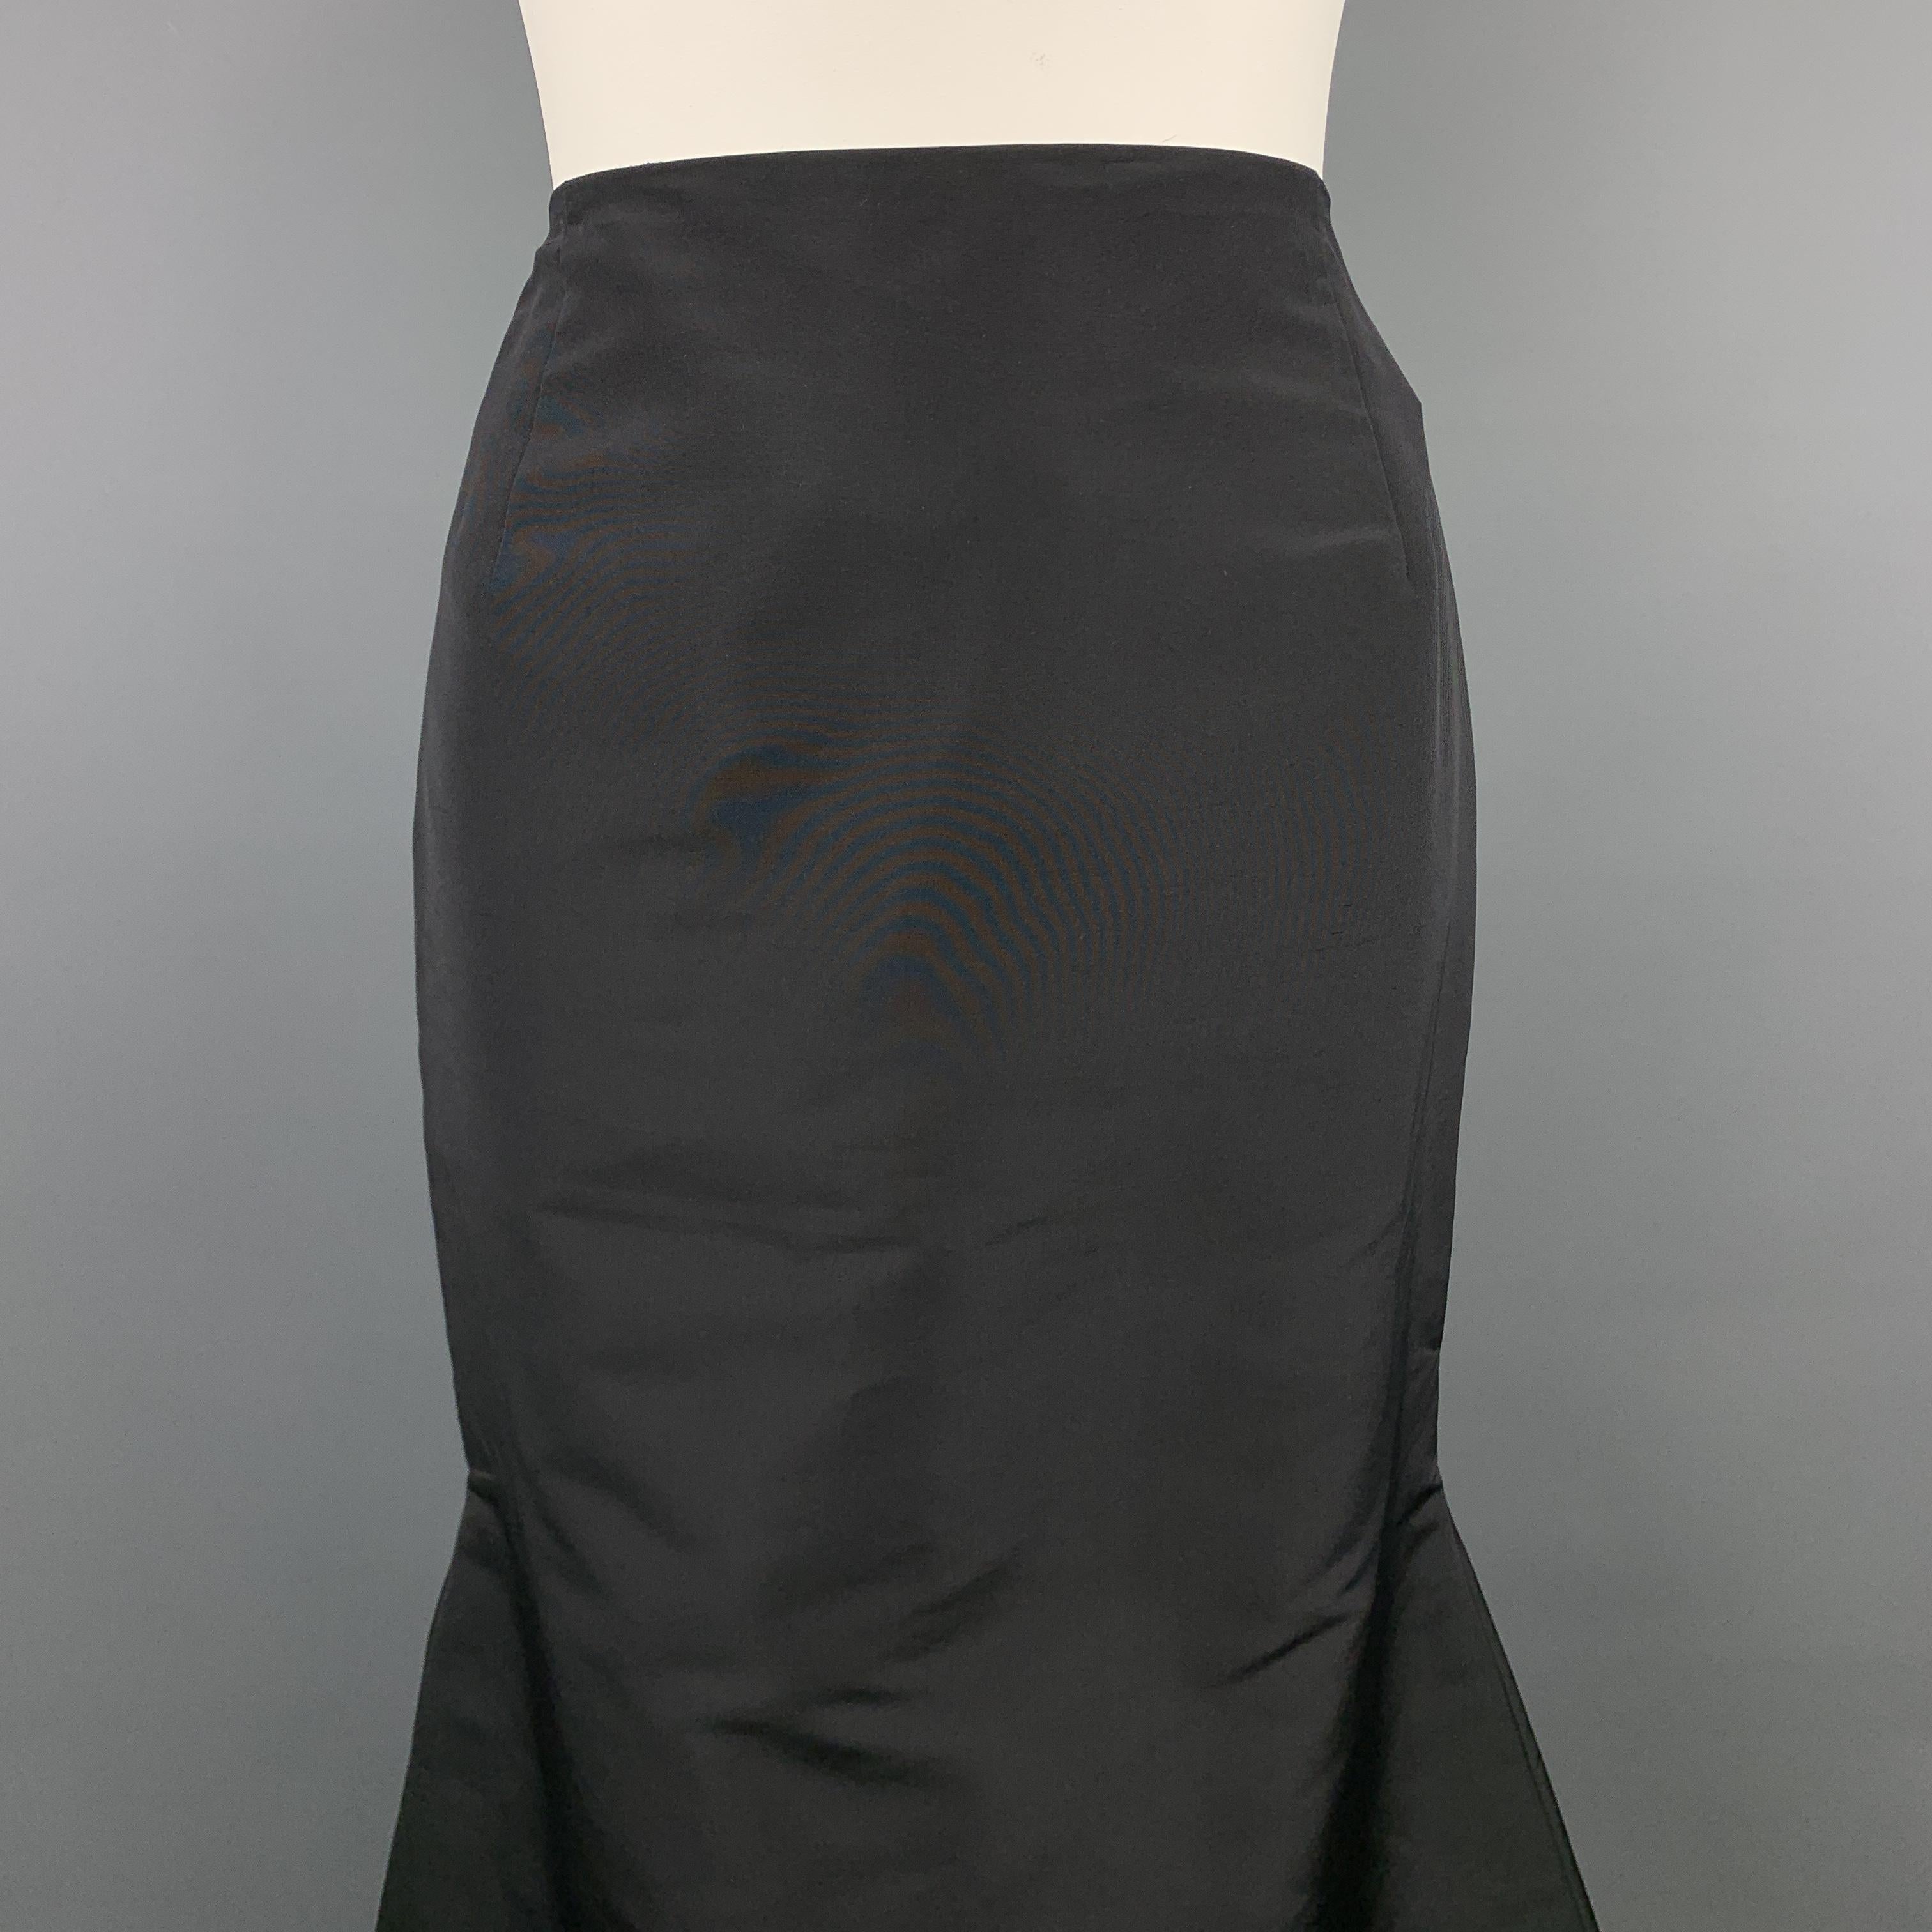 CAROLINA HERRERA evening skirt comes in black silk faille taffeta with a high rise pencil like silhouette that flares out at the hem into a train. Made in USA.

Excellent Pre-Owned Condition. Retails: $1,990.00.
Marked: 12

Measurements:

Waist: 32